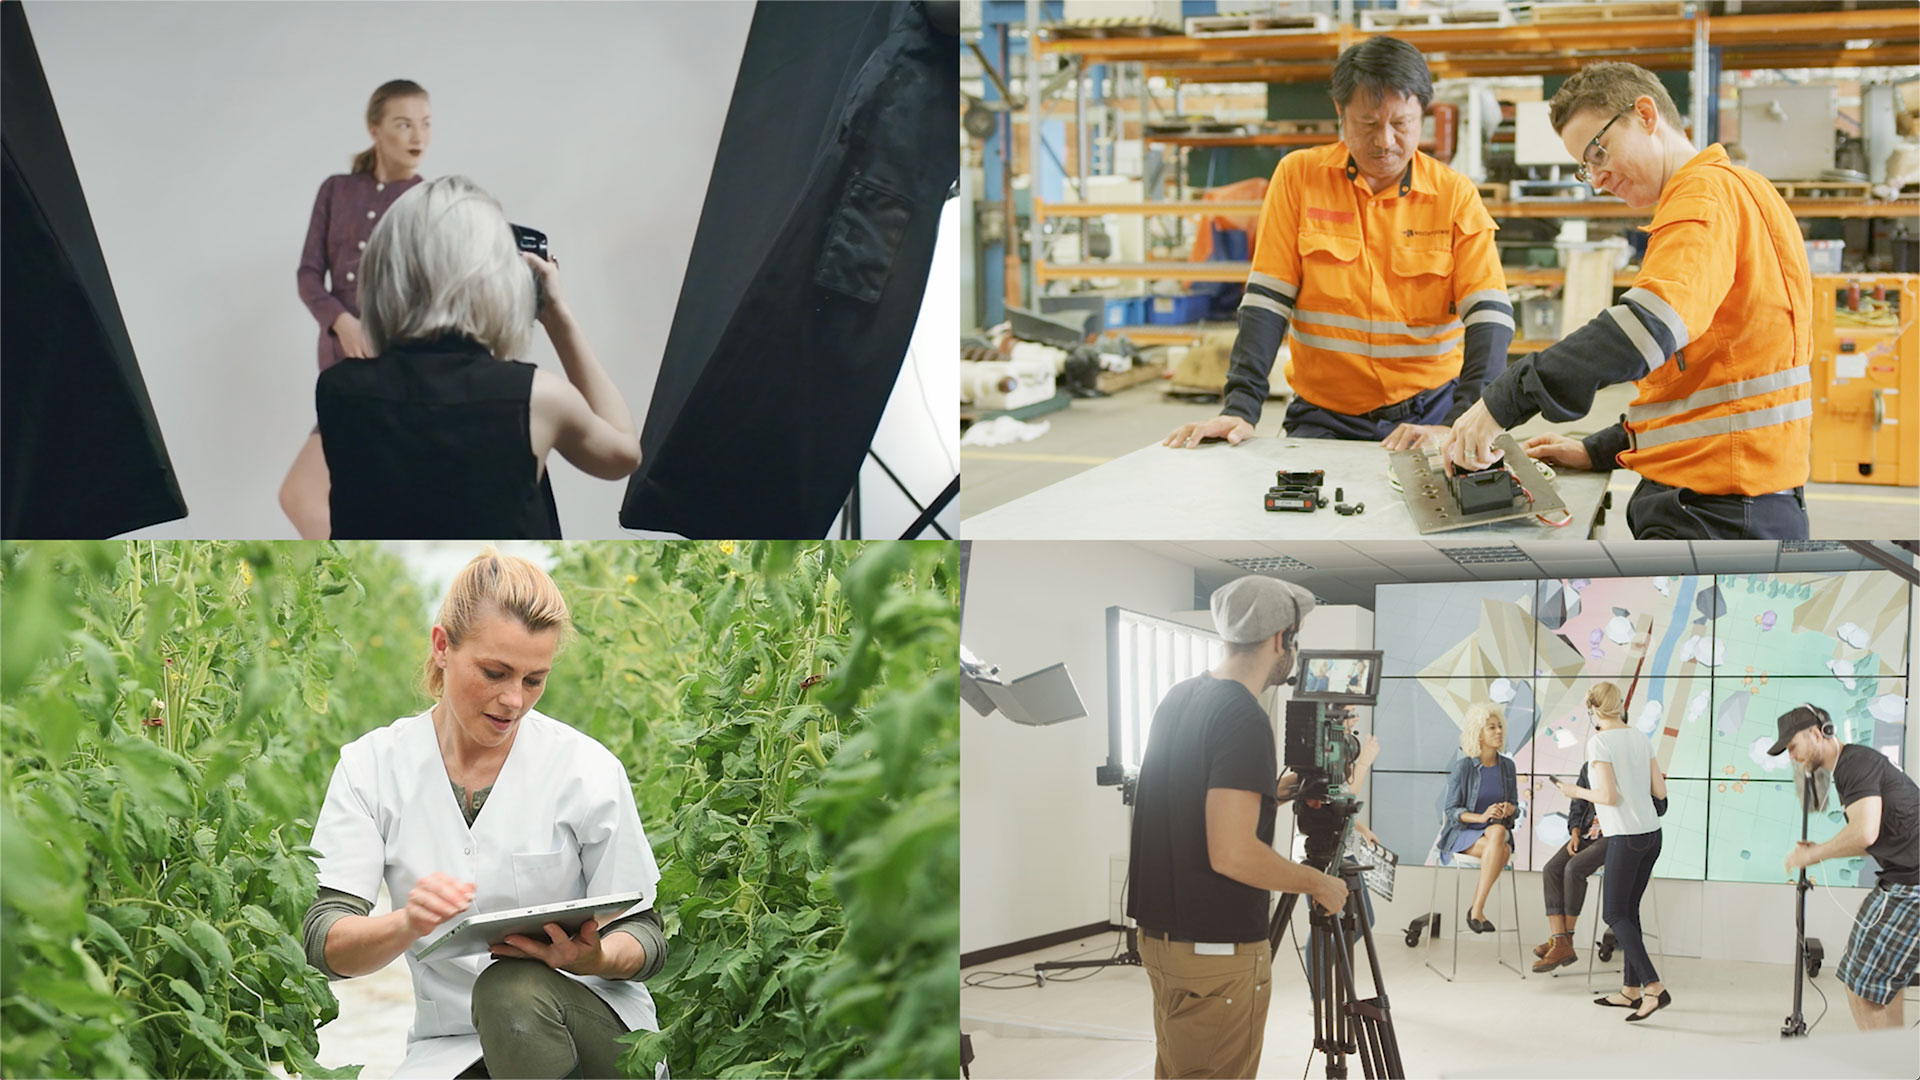 Collage of four images, each showing examples of VET graduates in the field: A photographer, people in the workshop, a woman in a field of crops, and a man working a camera for TV.